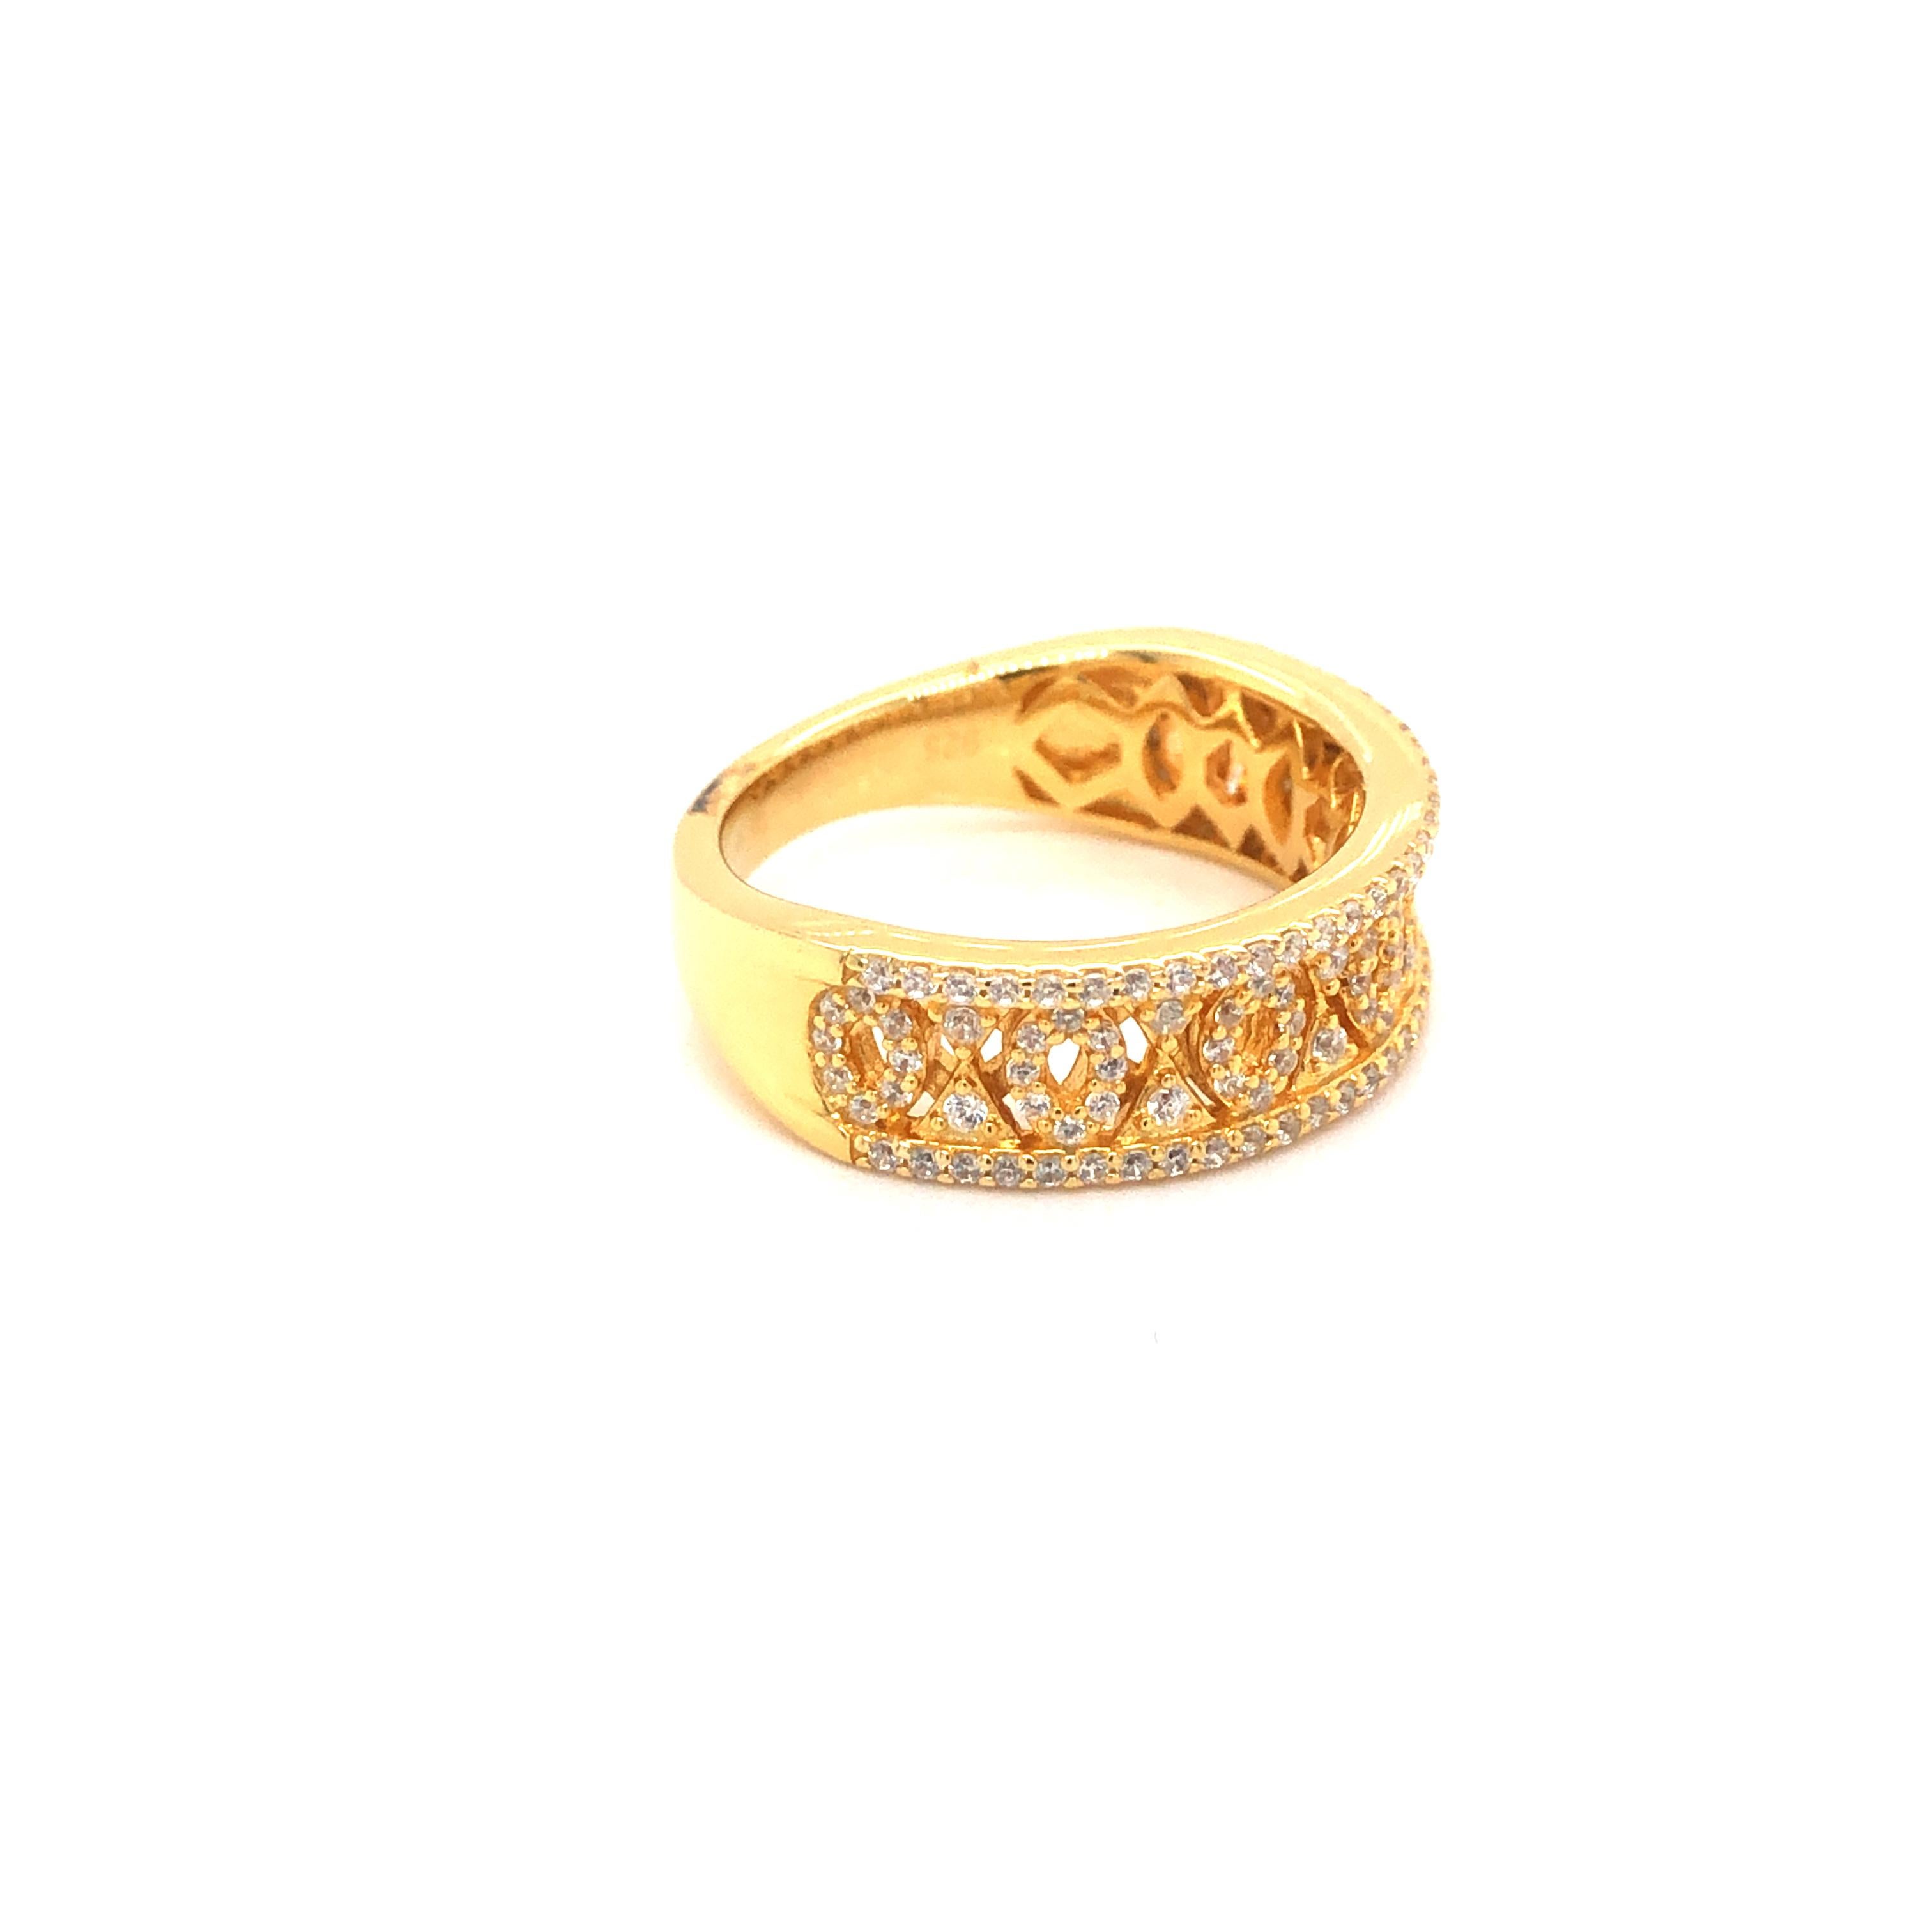 Women's 1.07 Carat Cubic Zirconia Yellow Gold Plated Half Filigree Wedding Band Ring For Sale